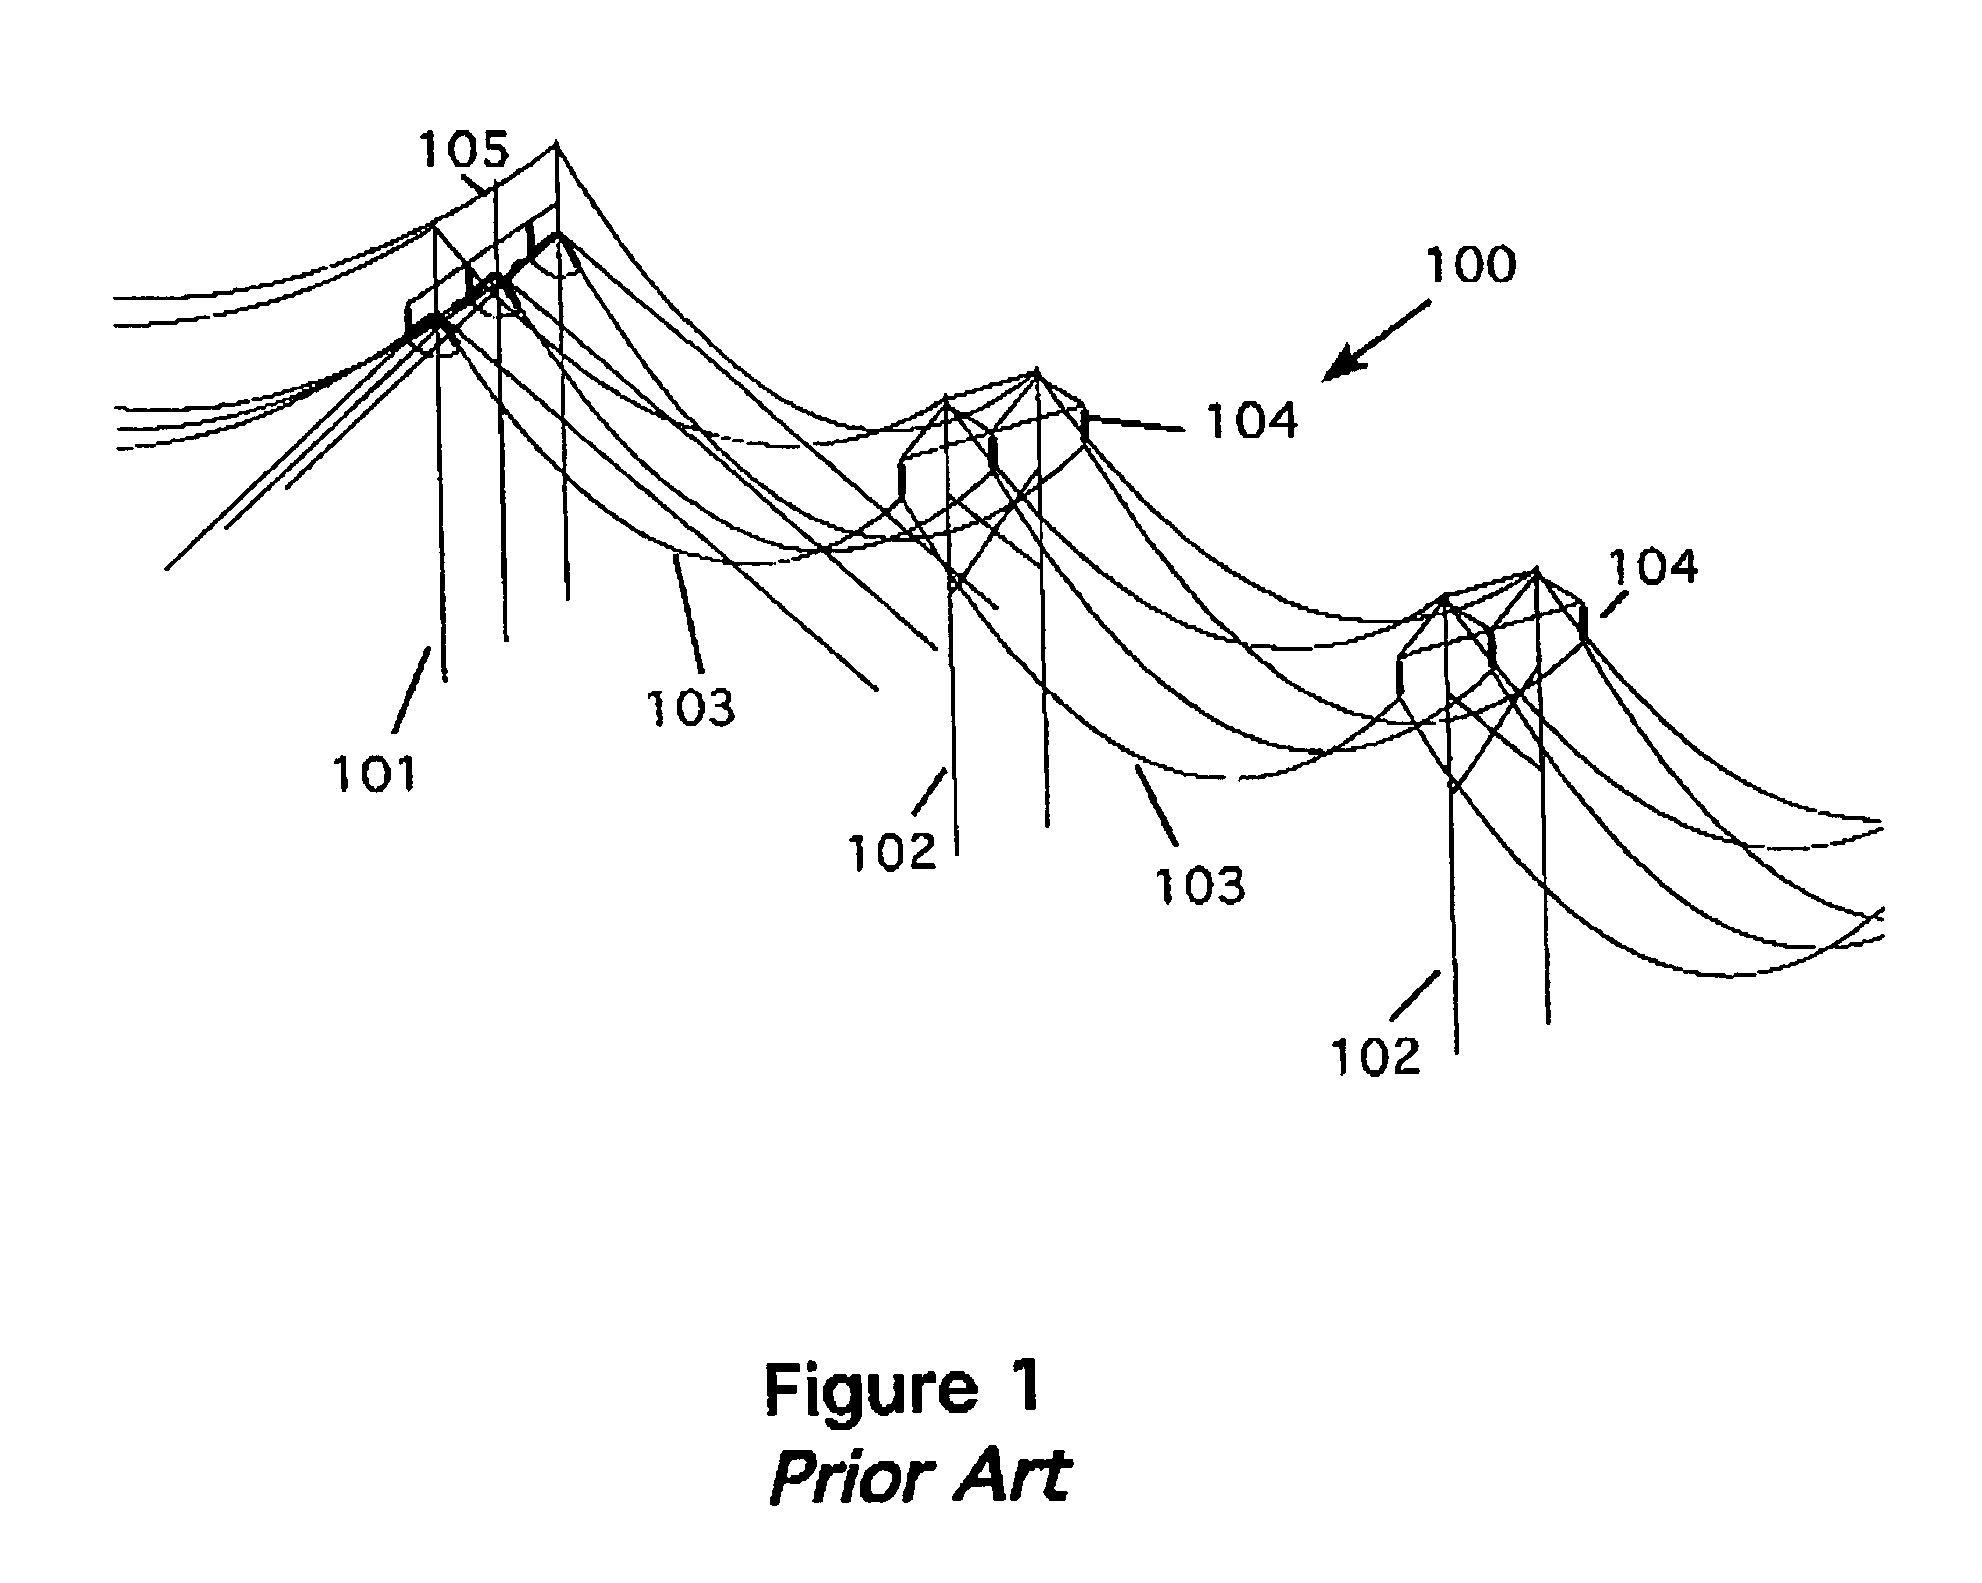 Transmission tower devices for reducing longitudinal shock loads